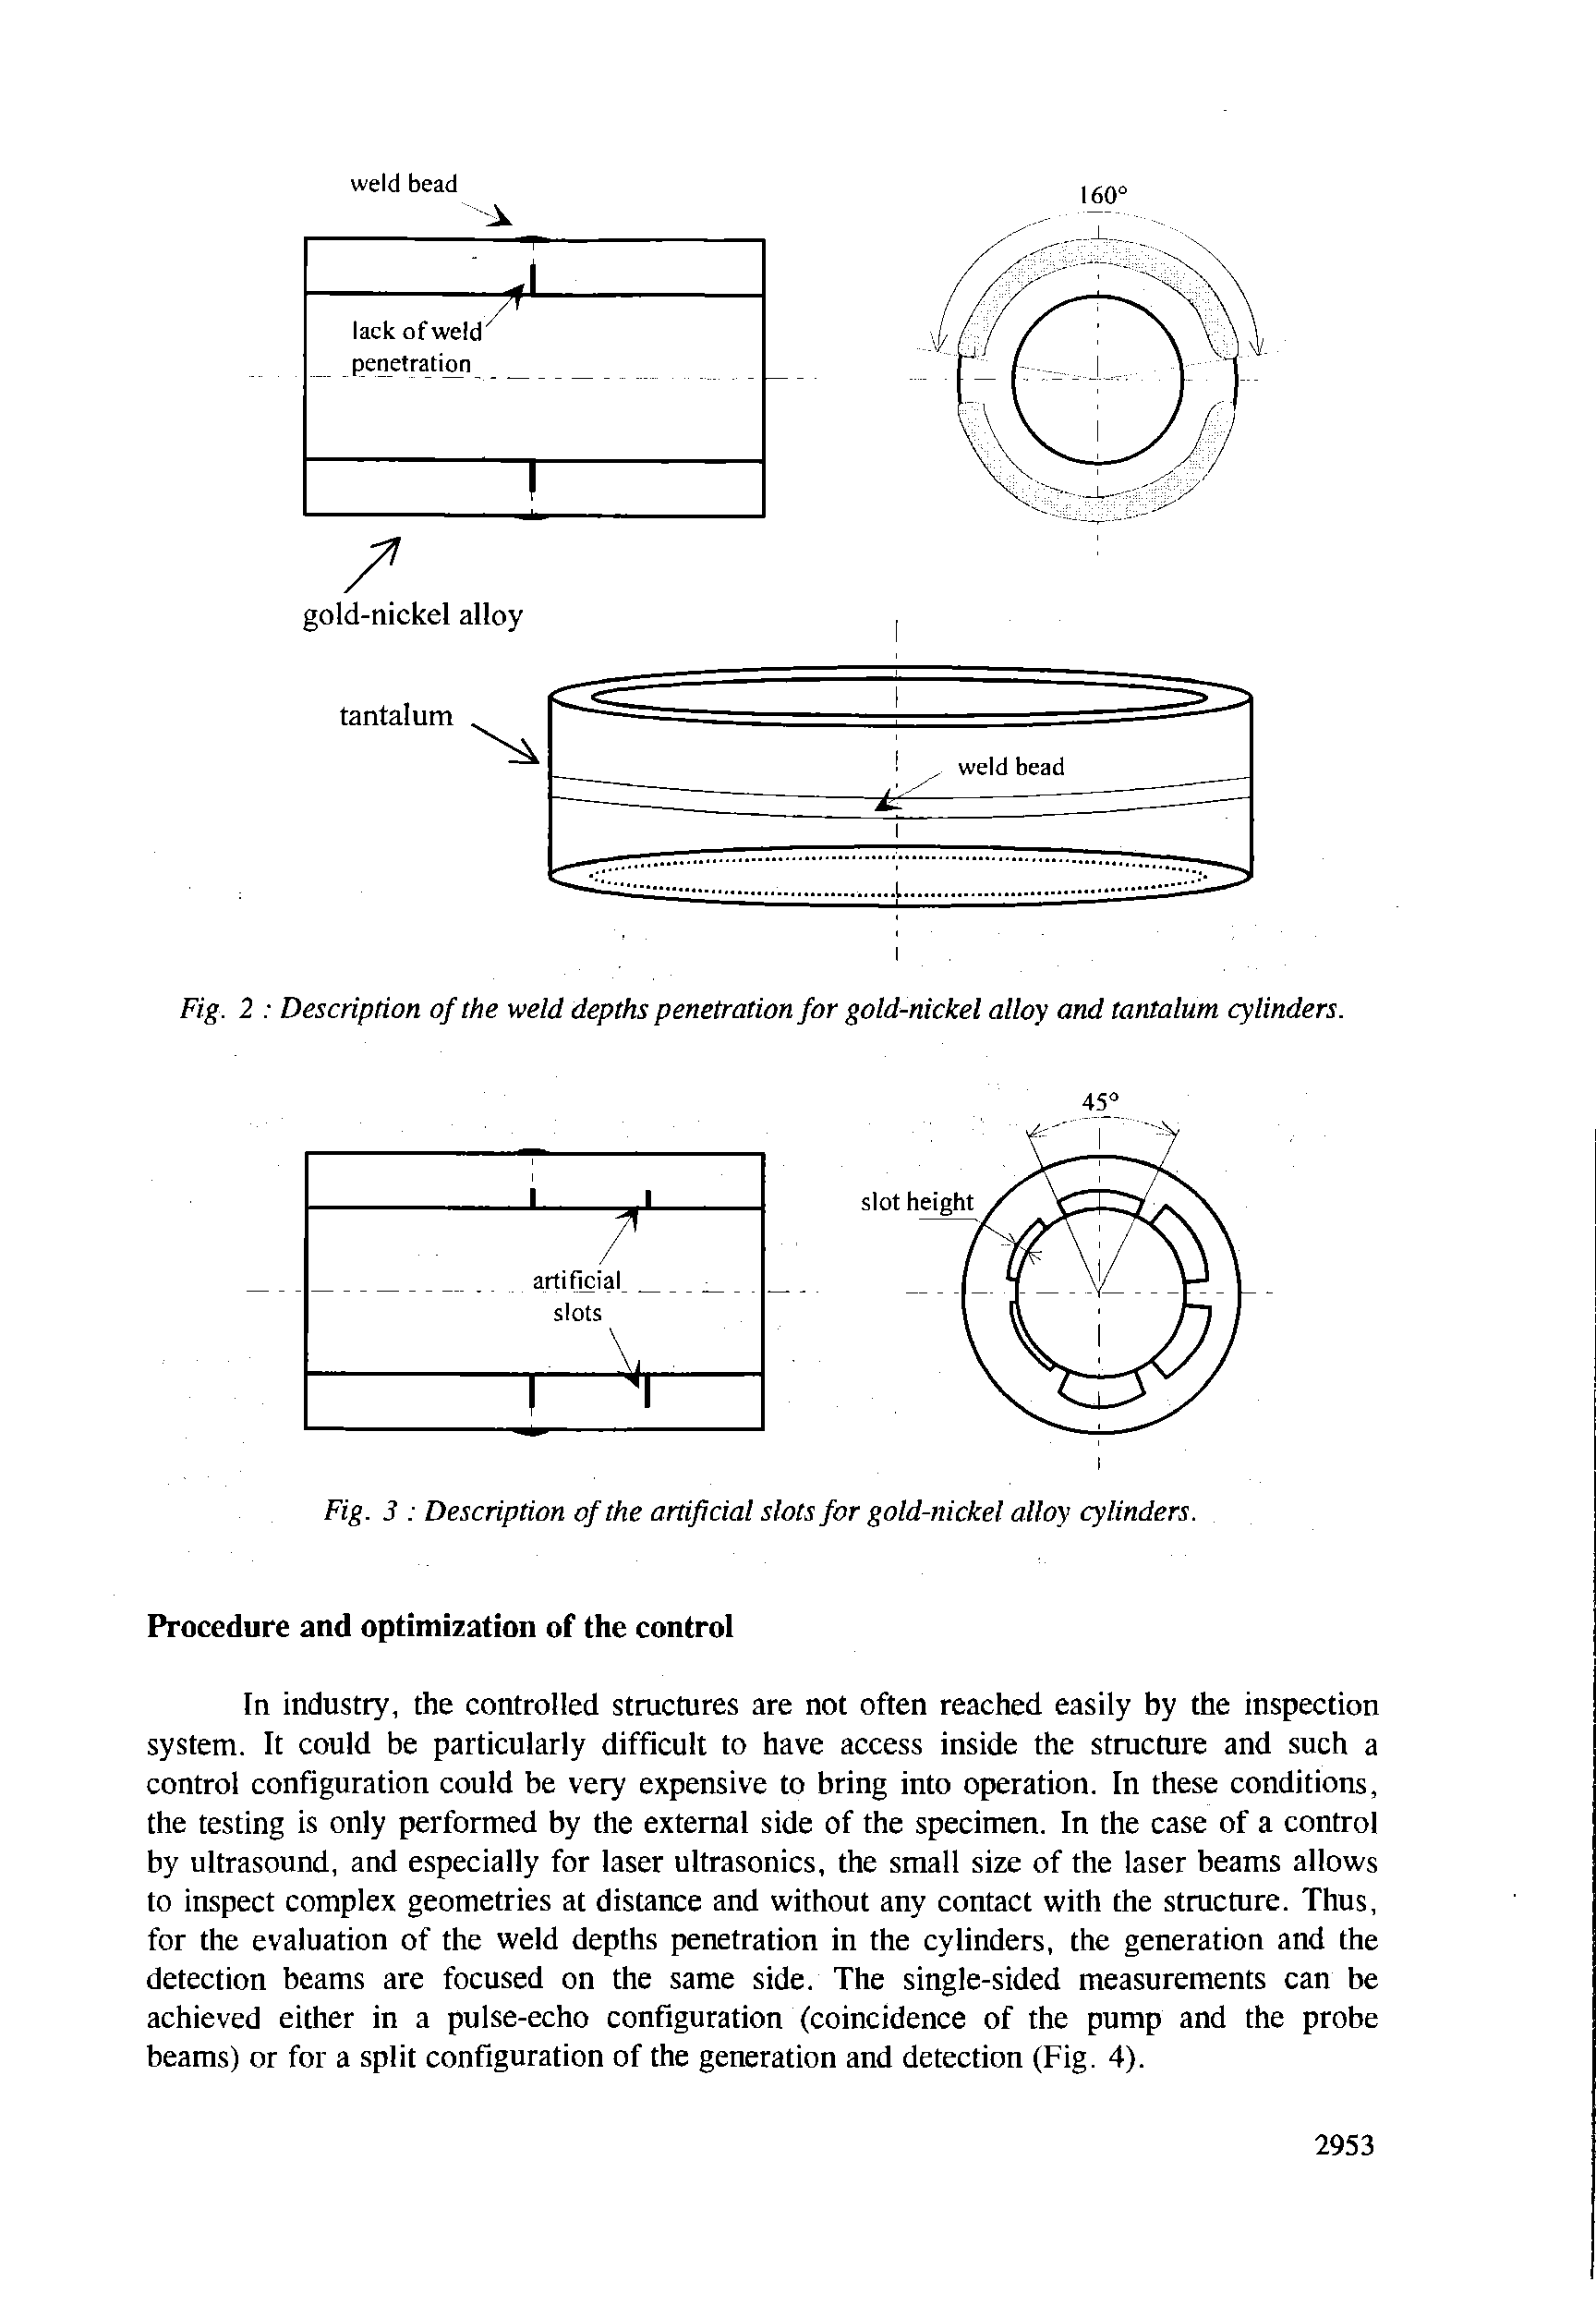 Fig. 3 Description of the artificial slots for gold-nickel alloy cylinders.